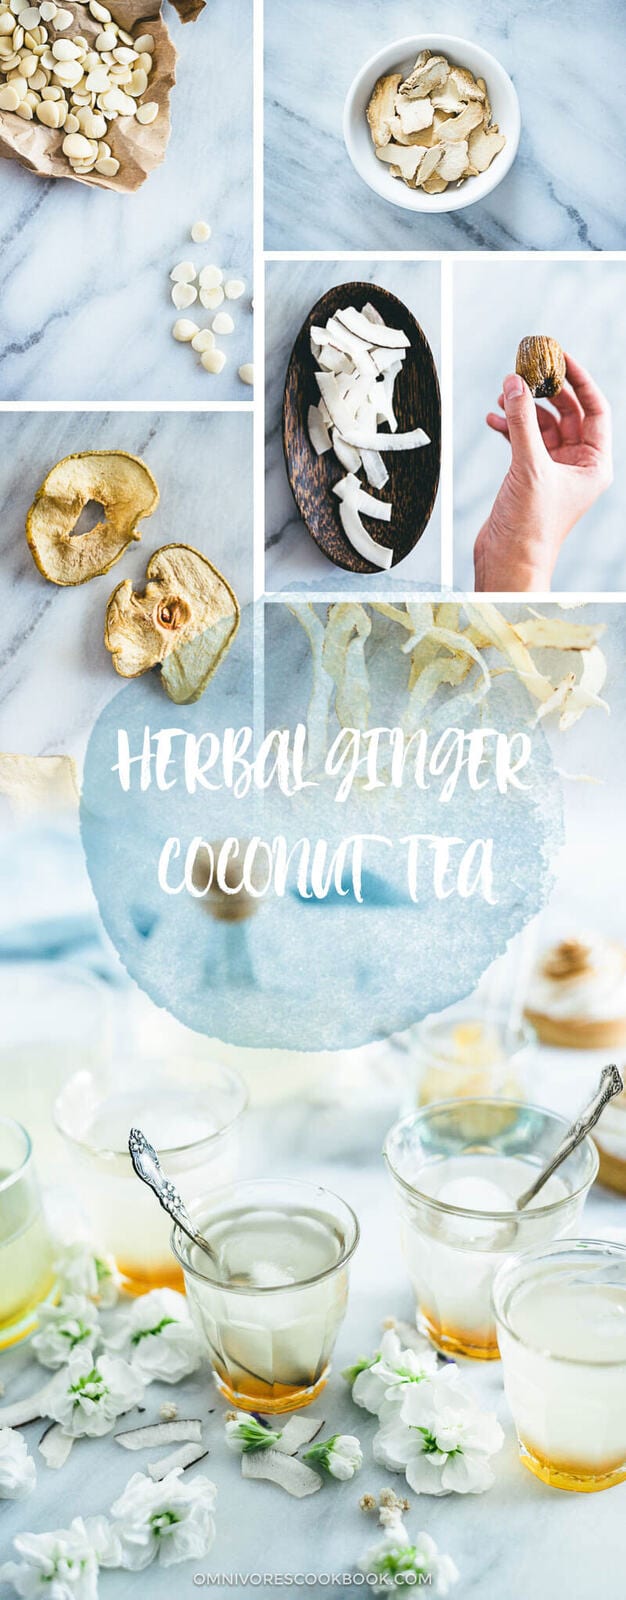 Herbal Ginger Coconut Tea | Recipes | For Weight Loss | Remedies | Blends | Weightloss | Detox | Chinese | For Skin | Summer | Indigestion |